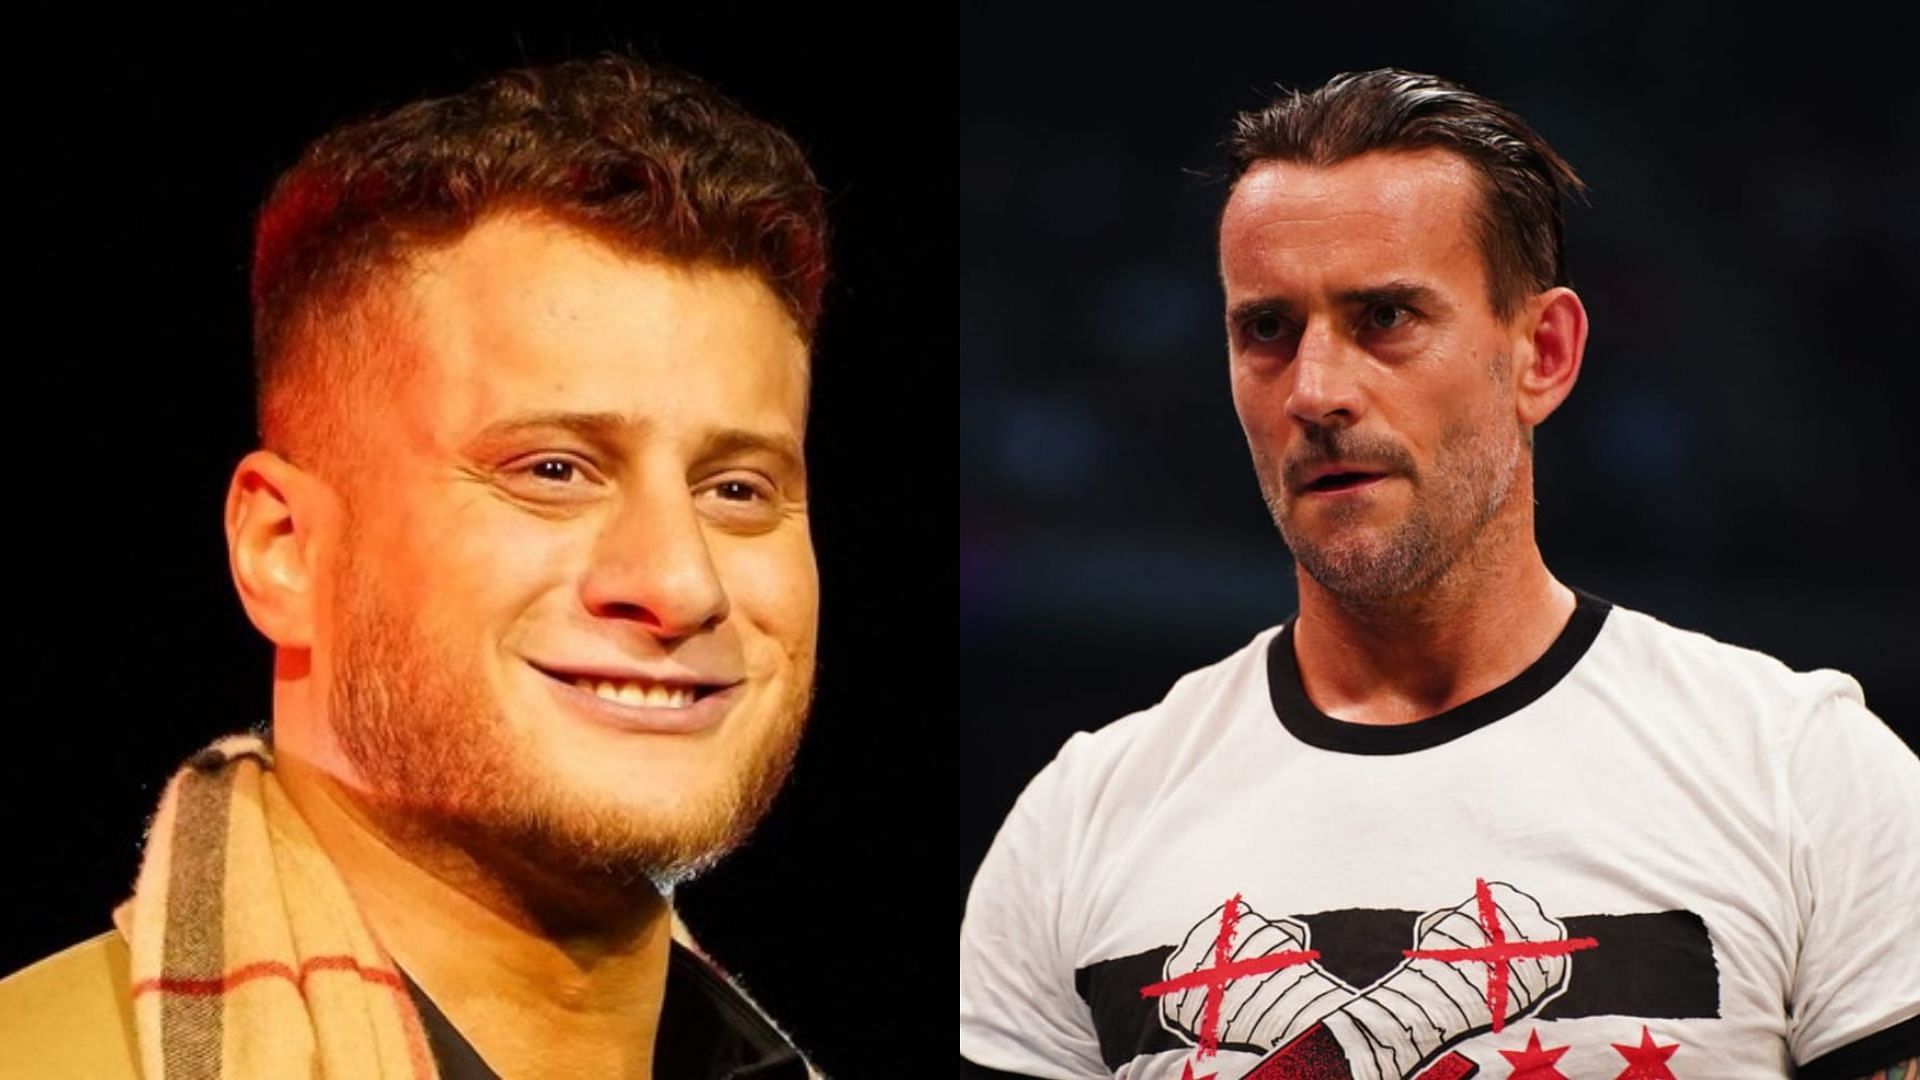 MJF (left) and CM Punk (right).